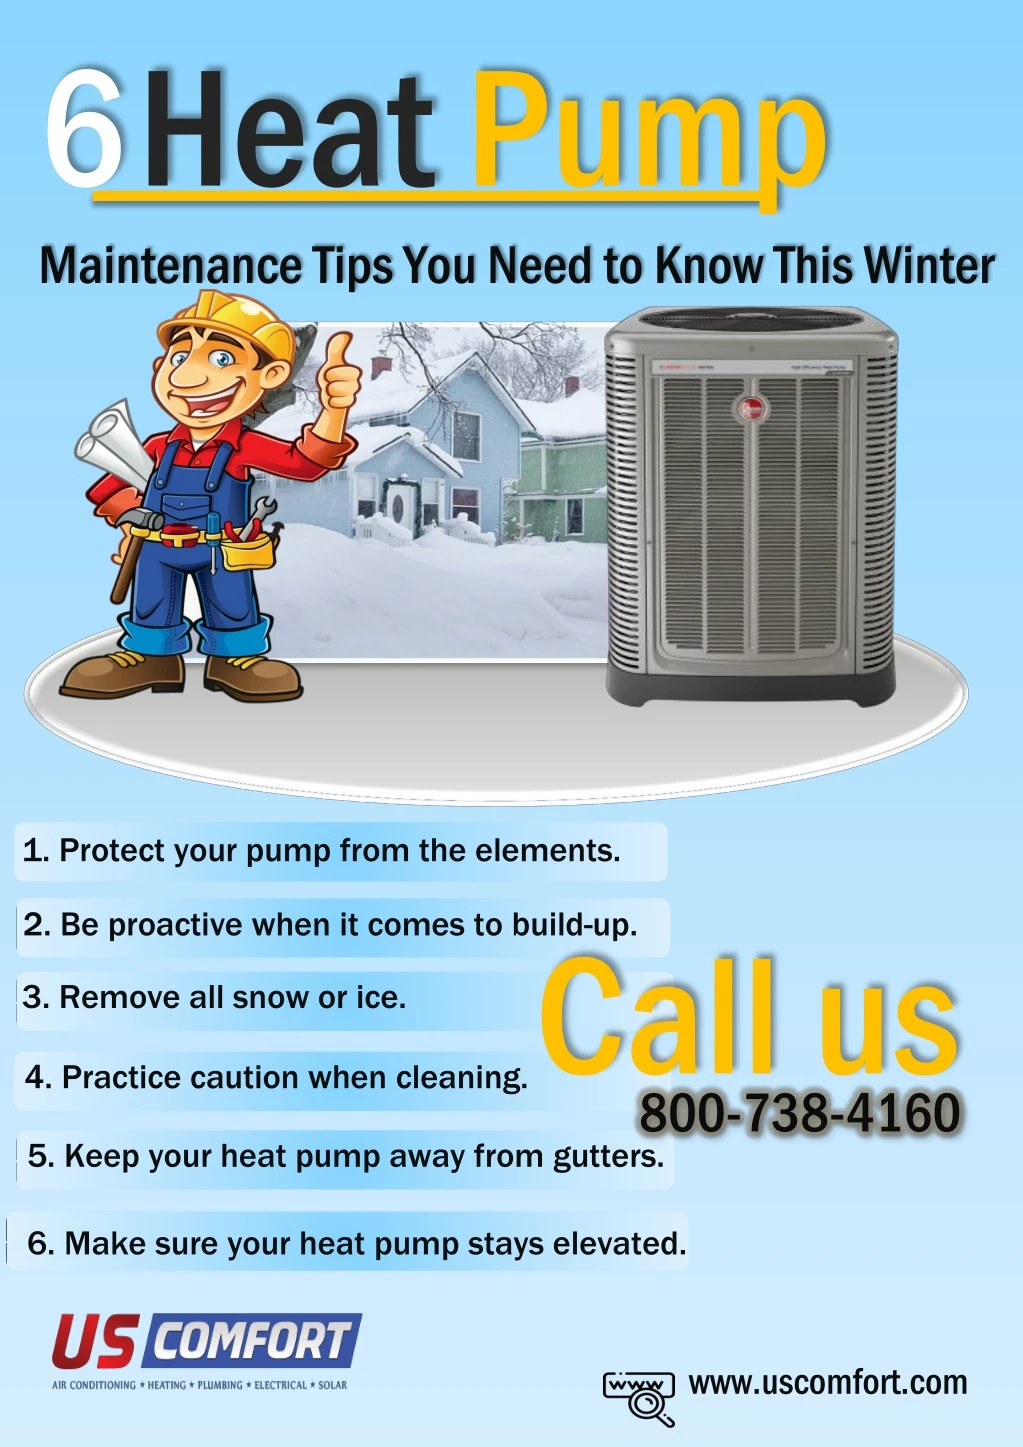 6 heat pump maintenance tips you need to know